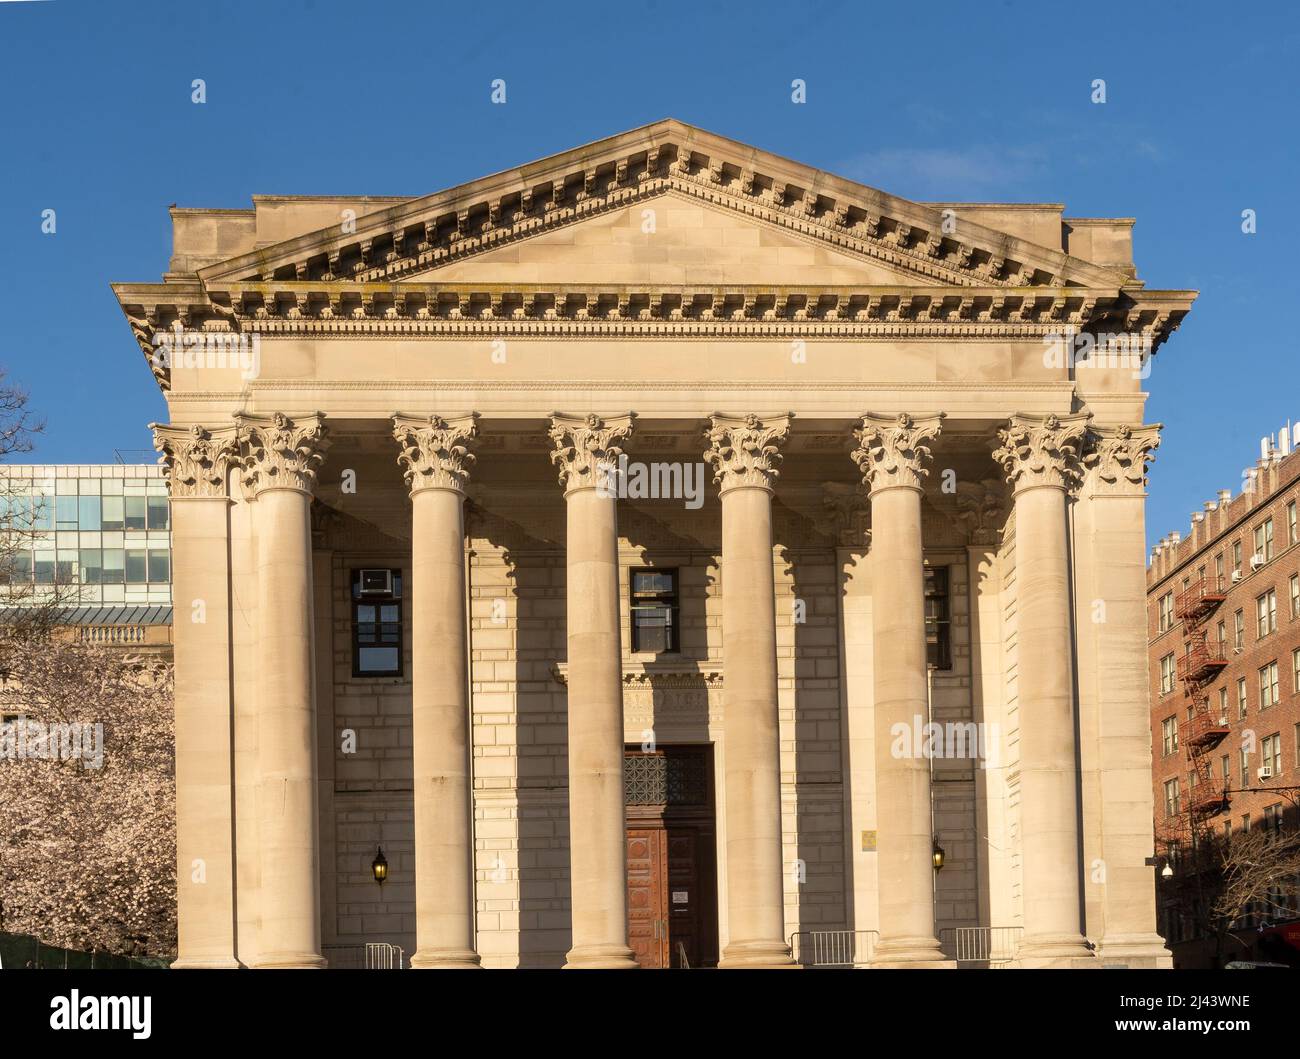 Staten Island, NY - USA - April 10, 2022: Horizontal view of the neoclassical style Richmond County Courthouse, a 1919 municipal courthouse in the civ Stock Photo